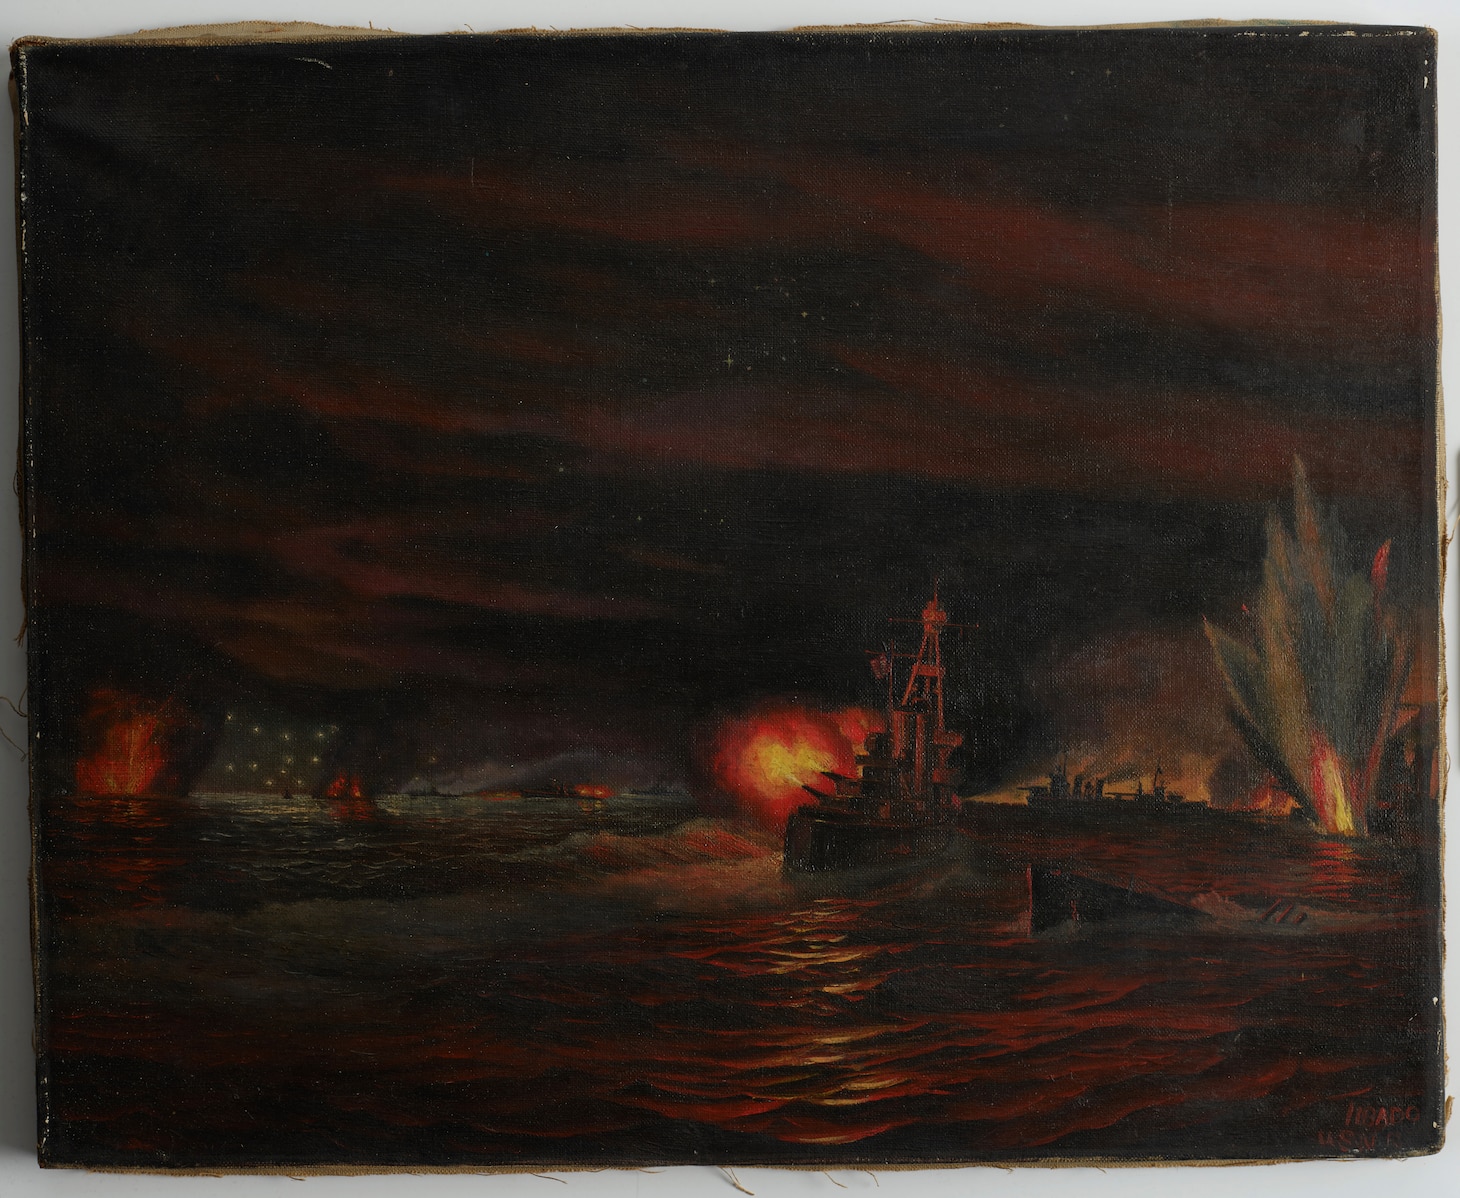 “Battle of Tassafaronga” by Clarence J. Tibado. Oil on Canvas, ca. 1943. (National Museum of American History)